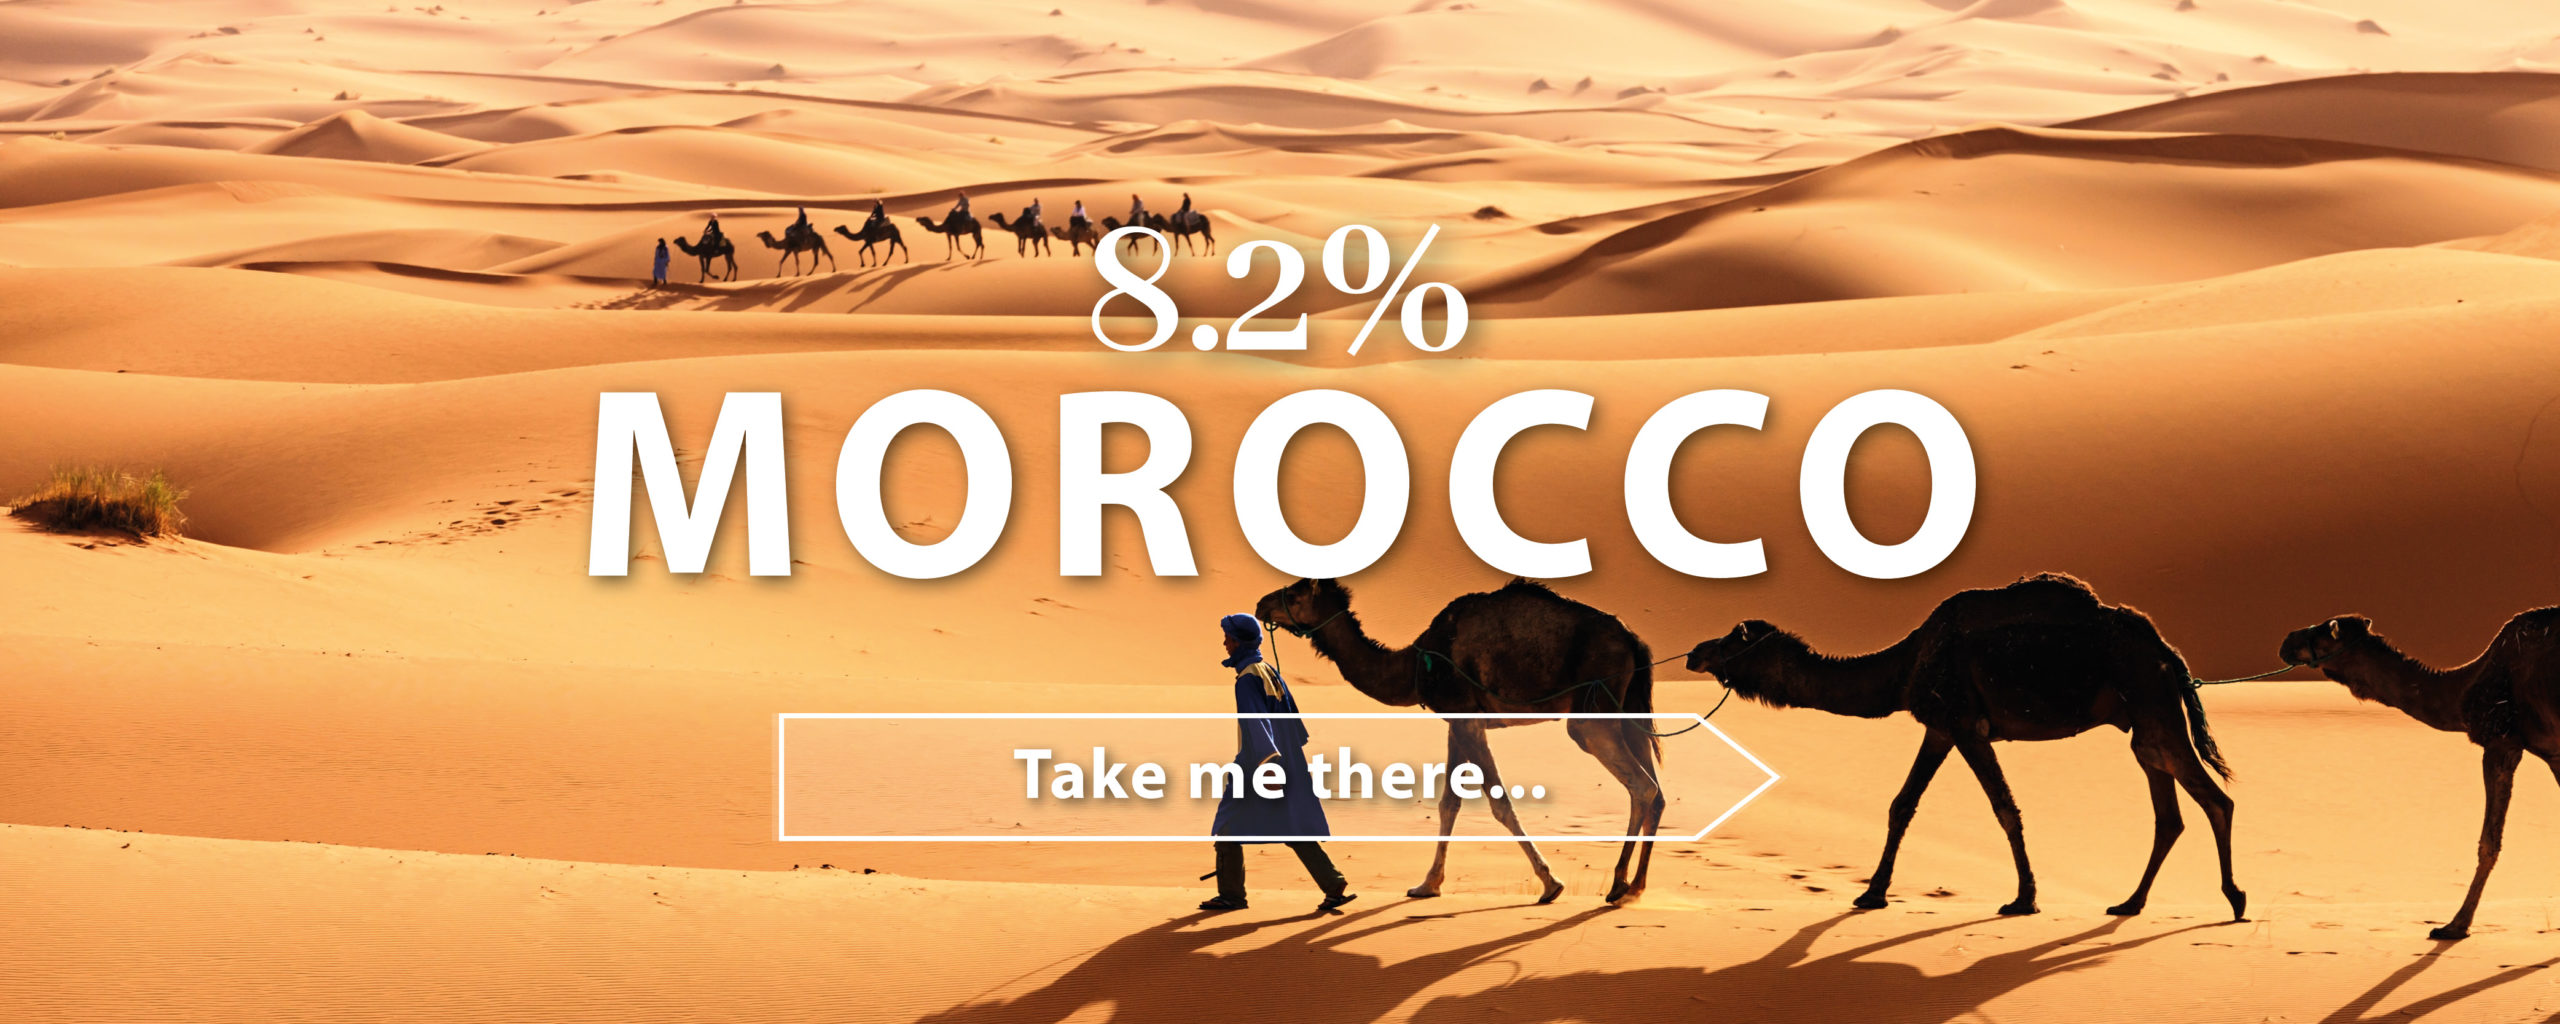 Where youre going this year_Morocco